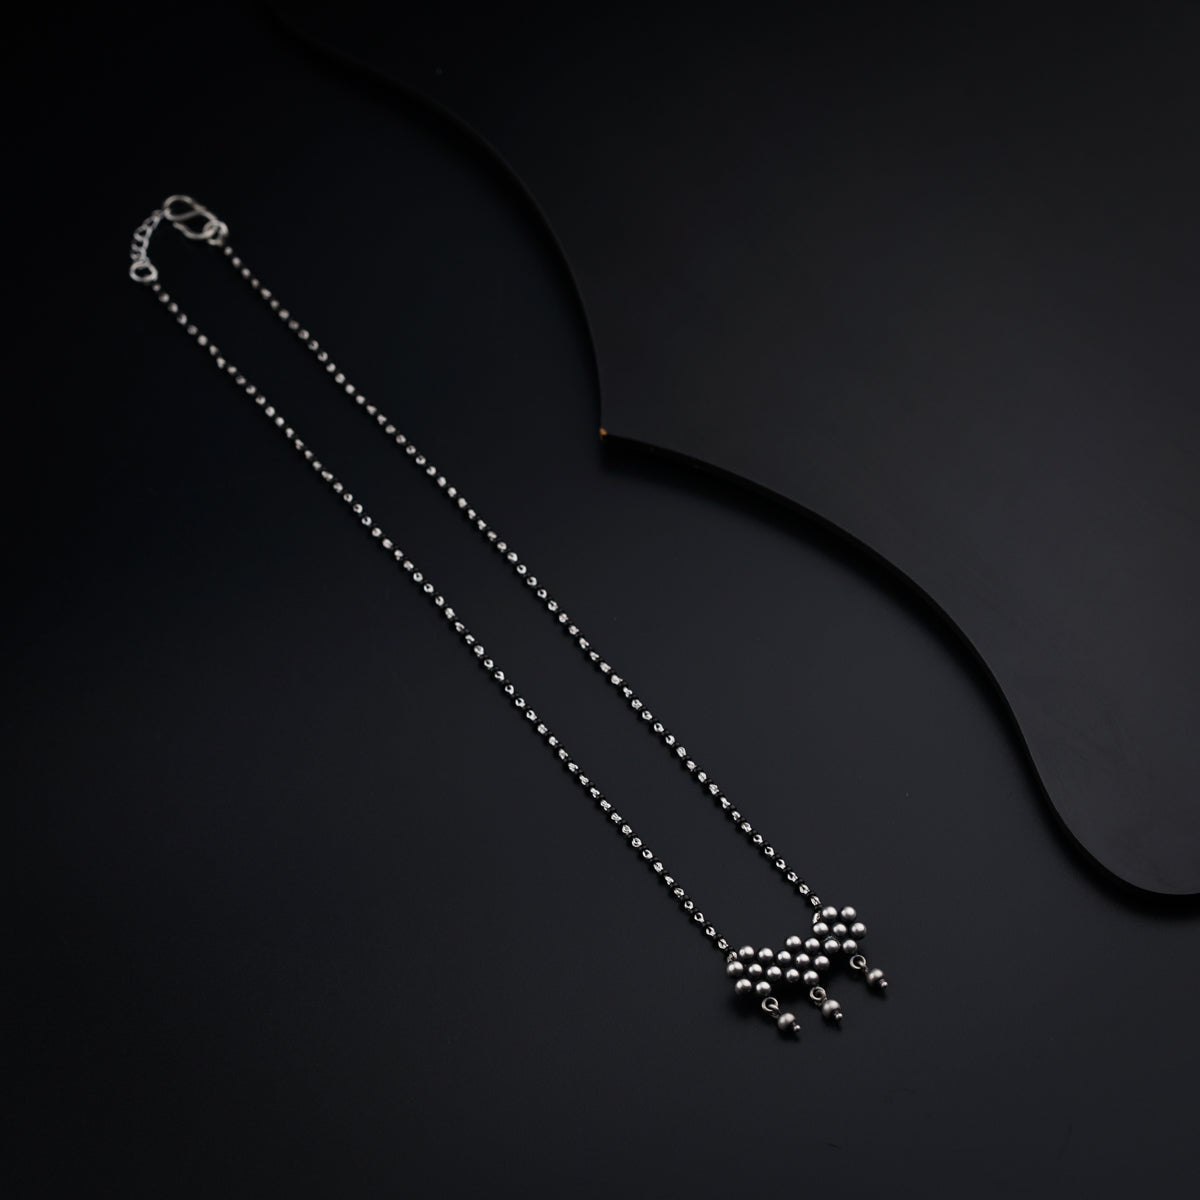 a necklace with a cross on it on a black surface